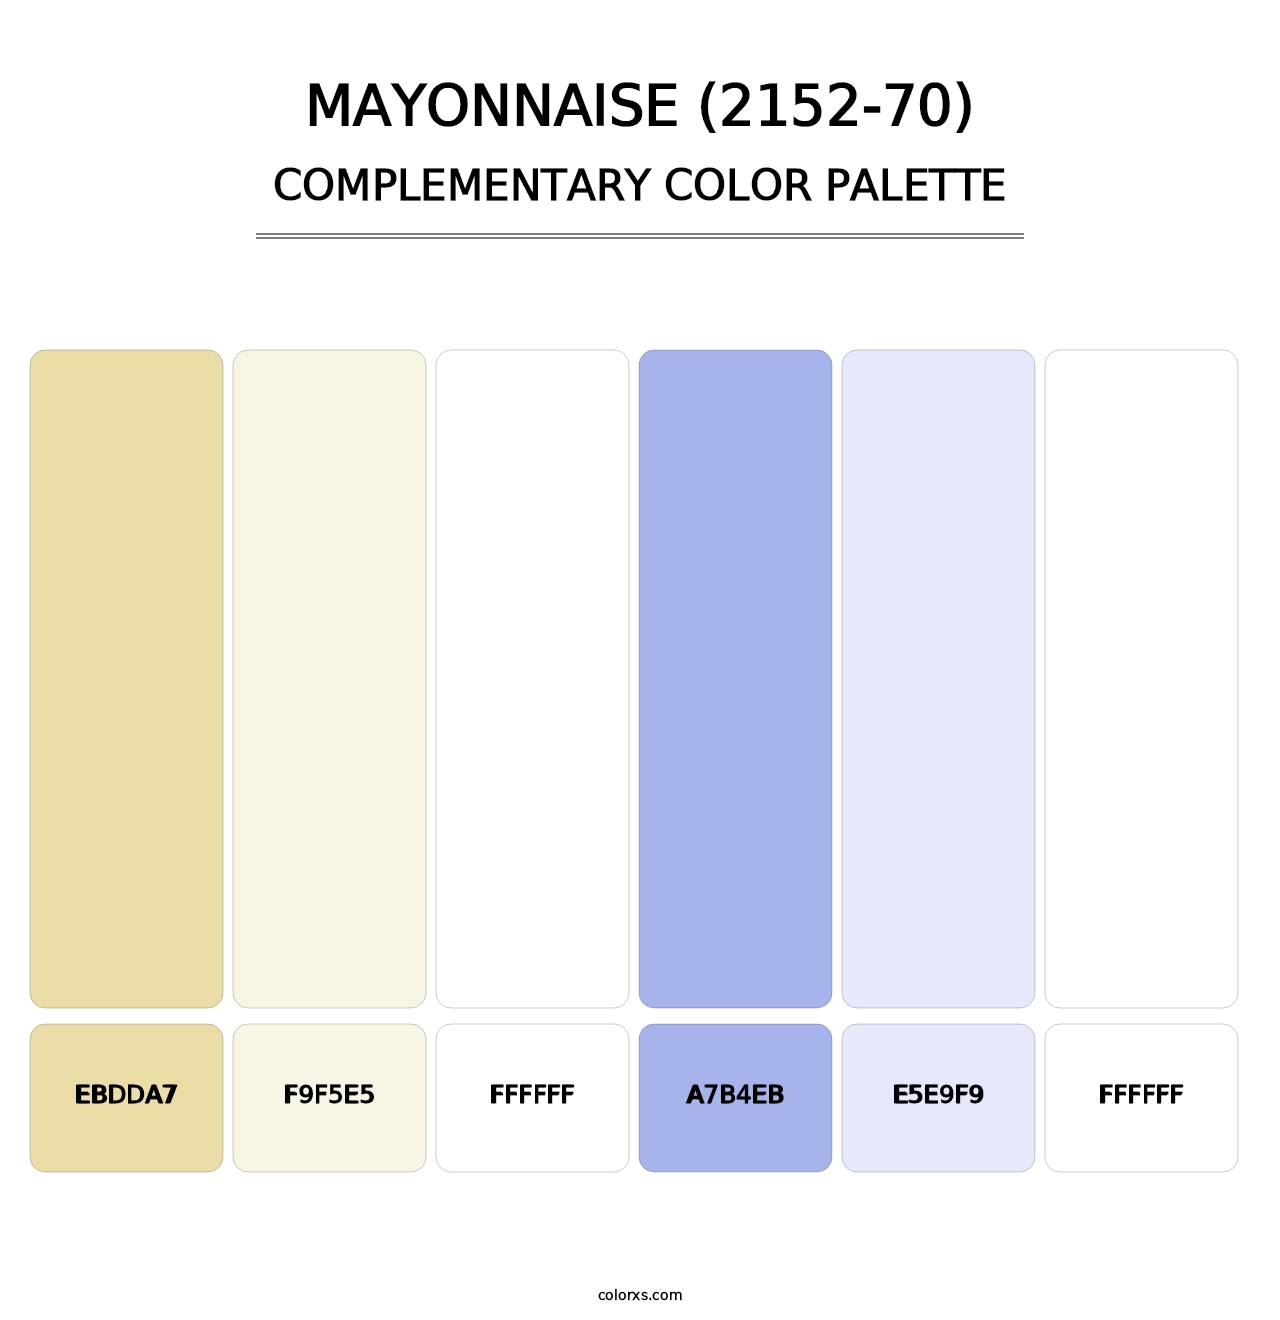 Mayonnaise (2152-70) - Complementary Color Palette